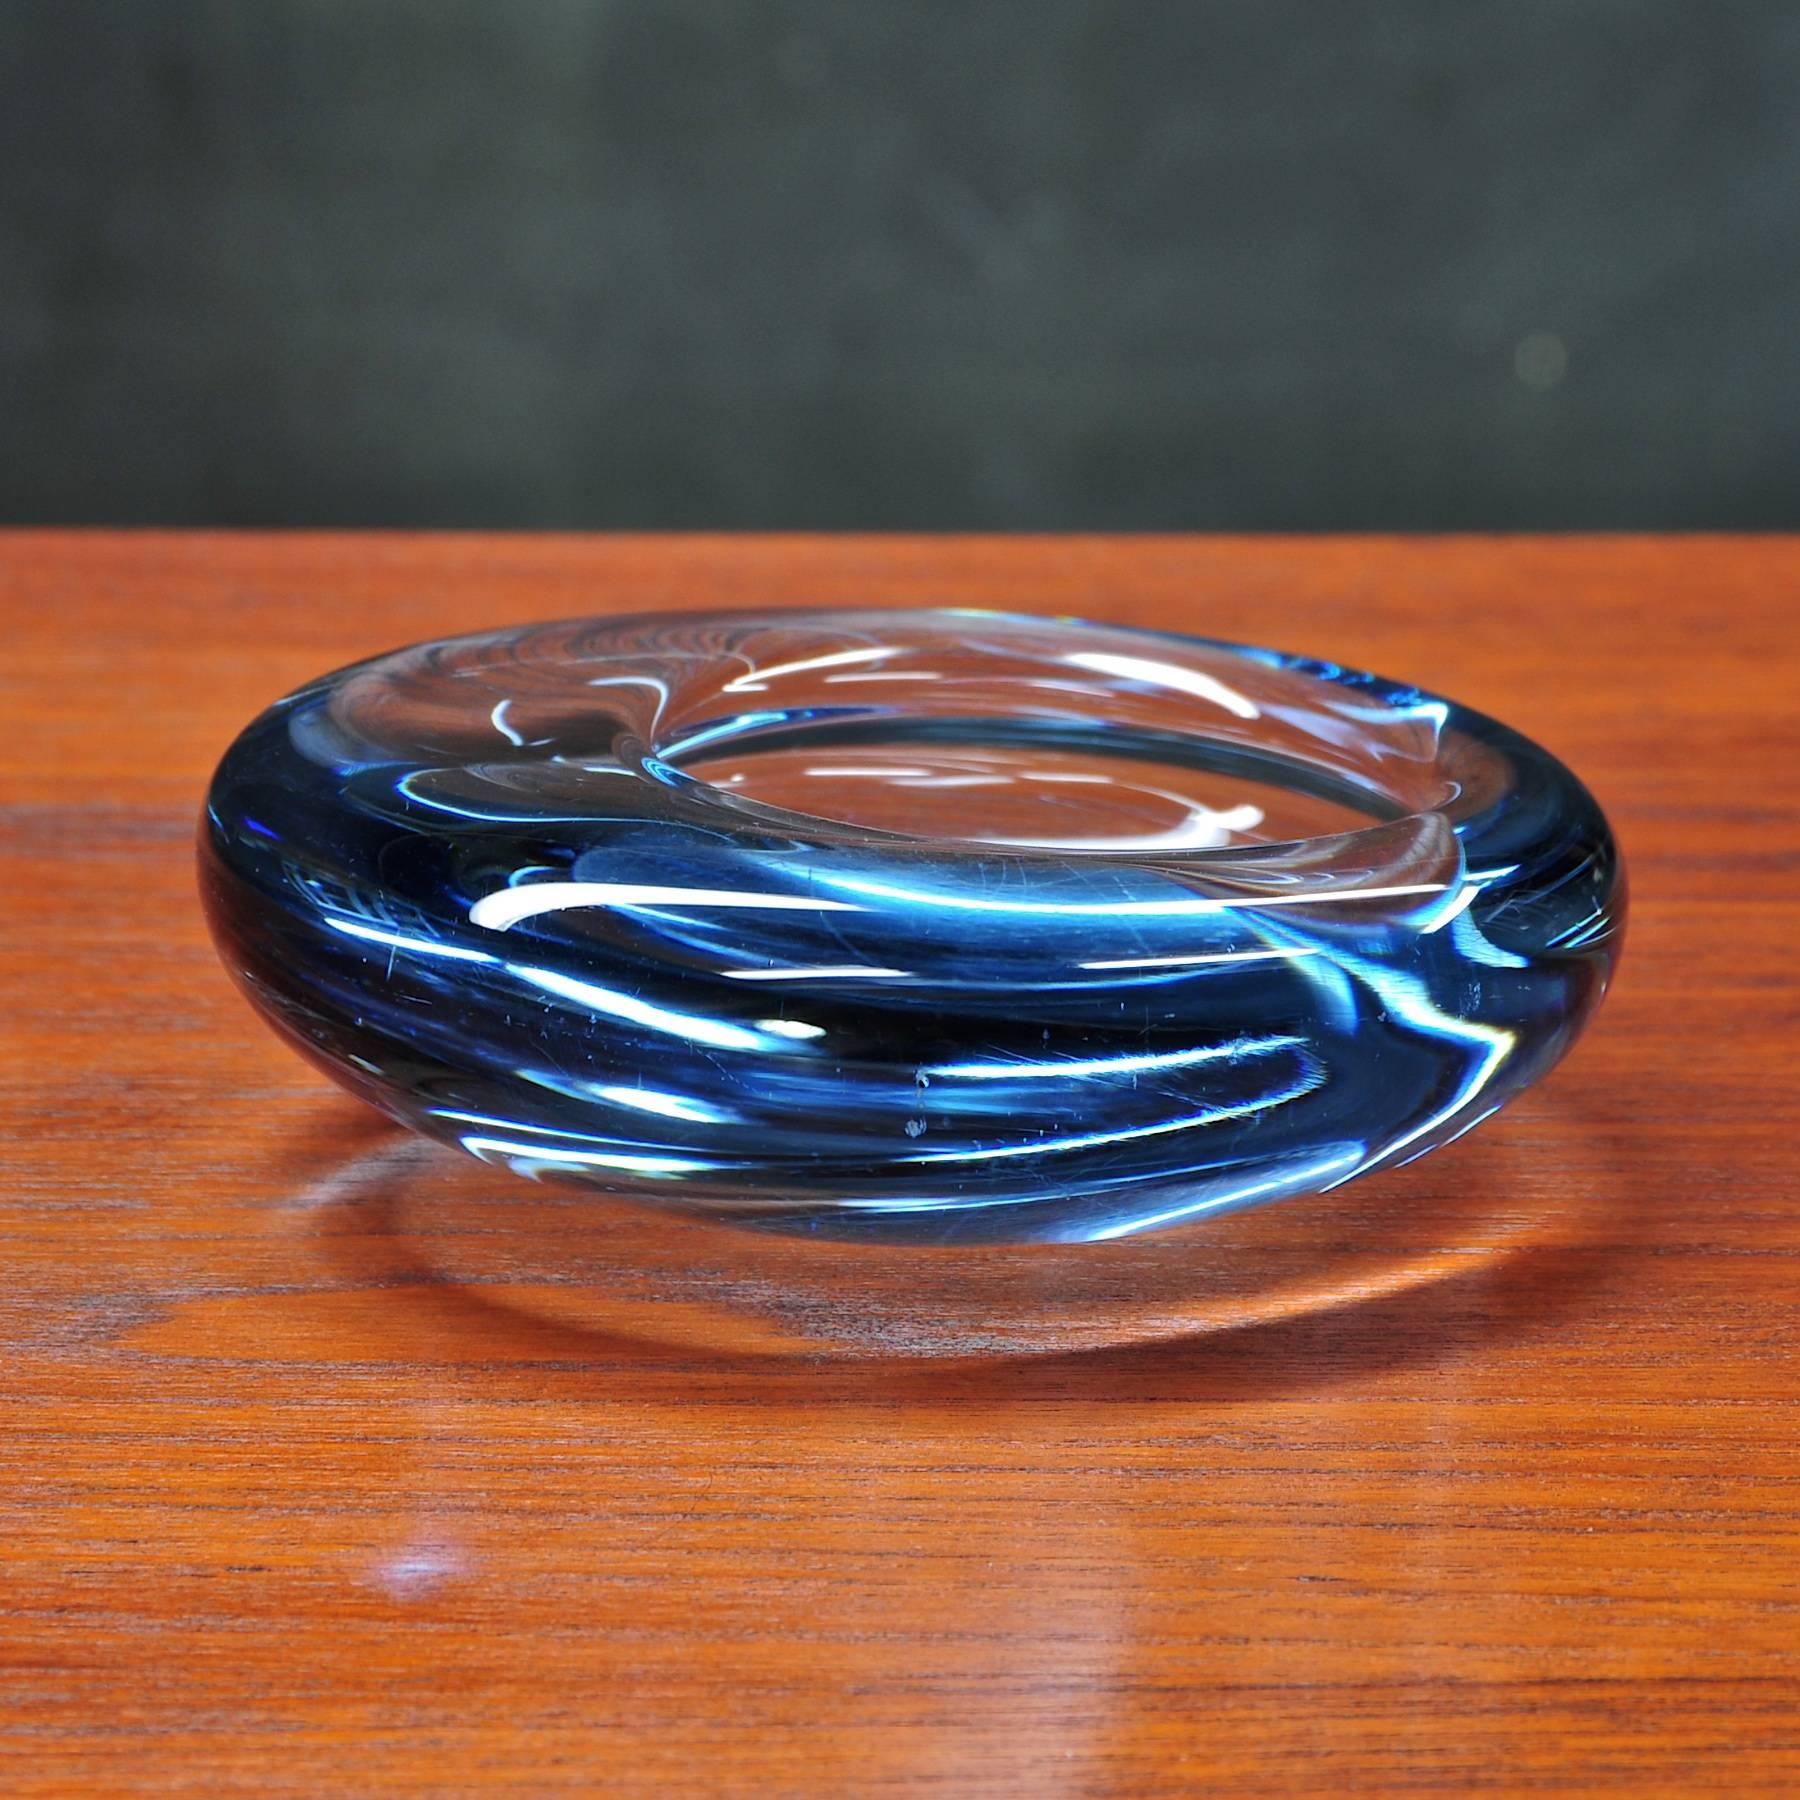 Denmark, 1961. Vintage Mid-Century Modern Holmegaard rare blue jellyfish glass dish by Per Lutken. Signed, dated. Good vintage condition showing some wear. Very rare to see as dish usually as ashtray. 

Dia: 5½ x H: 1.75 in.